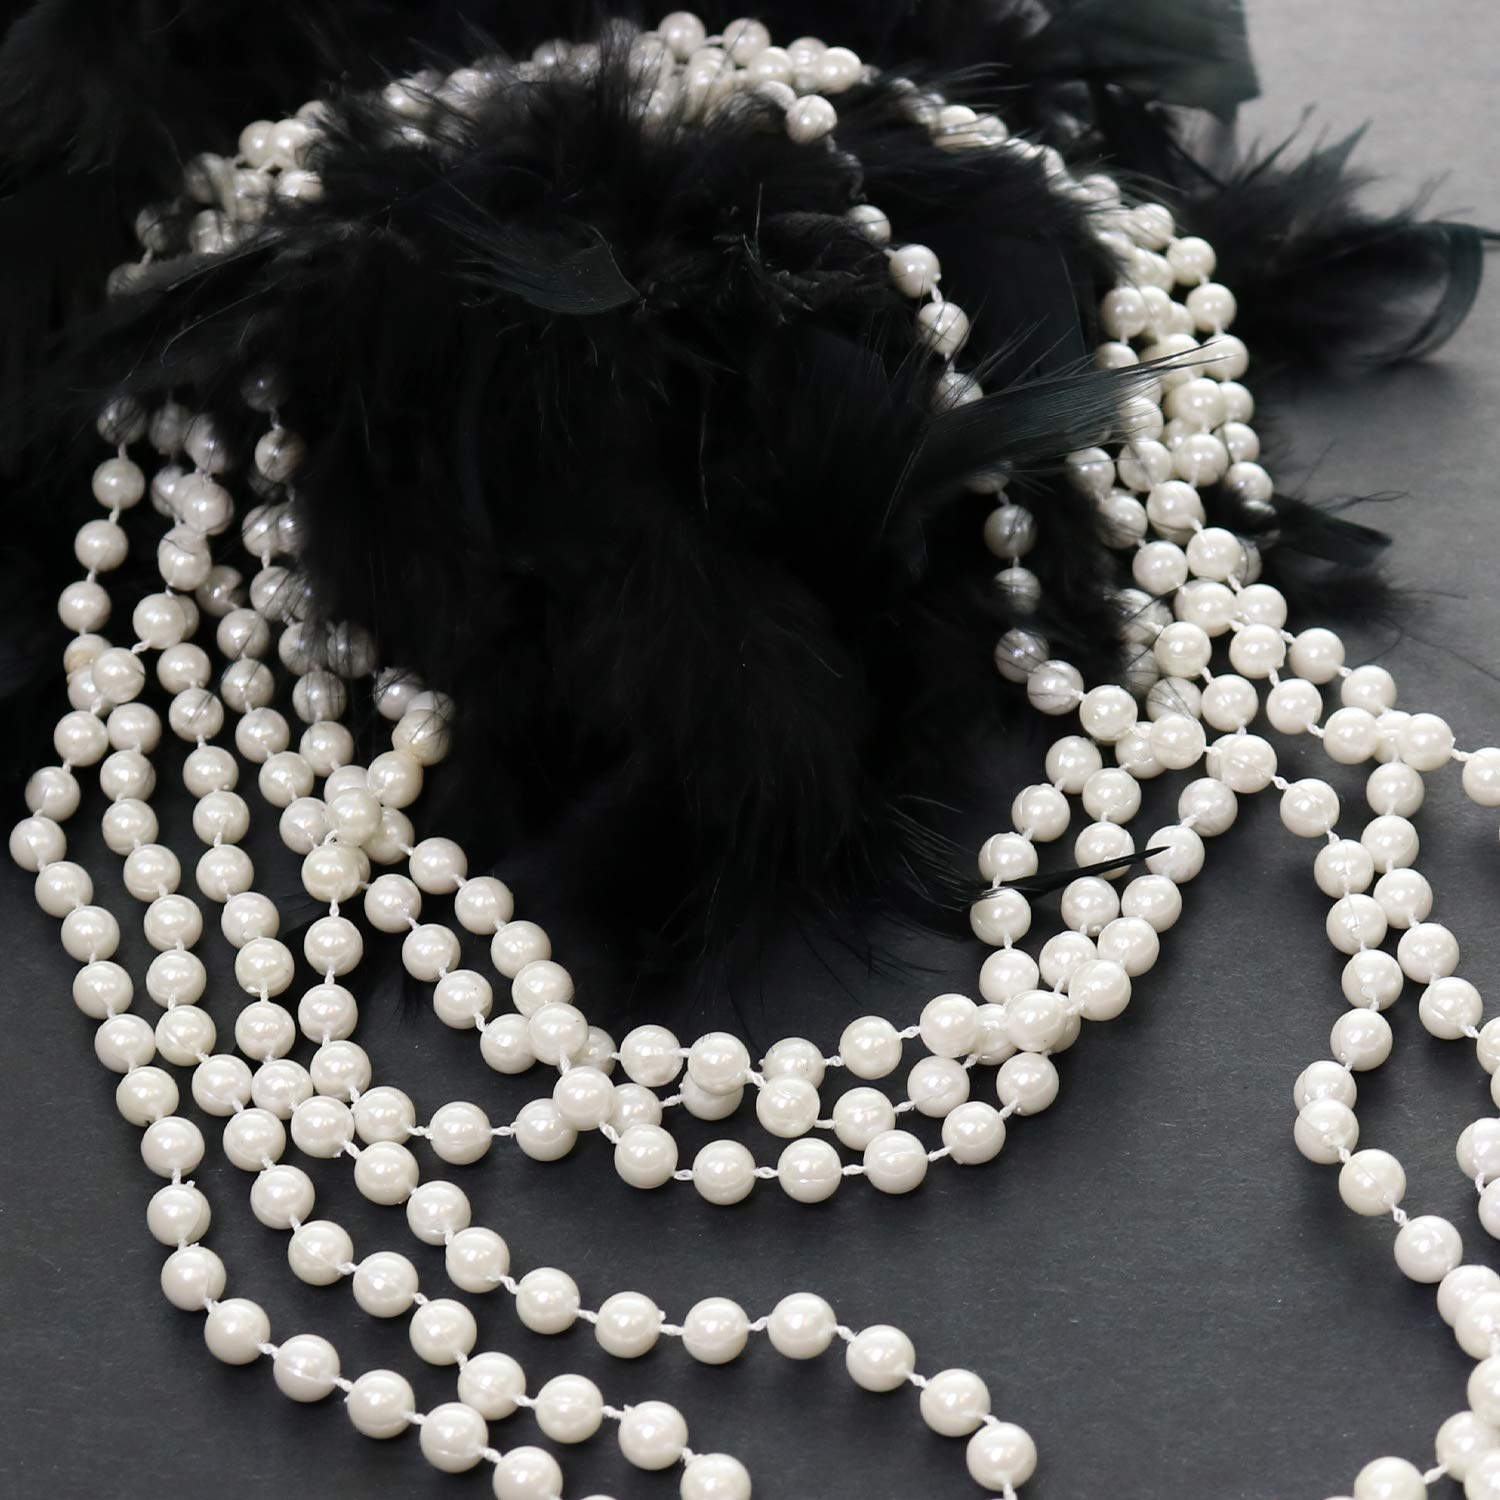 GIFTEXPRESSⓇ 12 PCS White Pearl Bead Necklaces Flapper Beads Party Accessory Party Favor